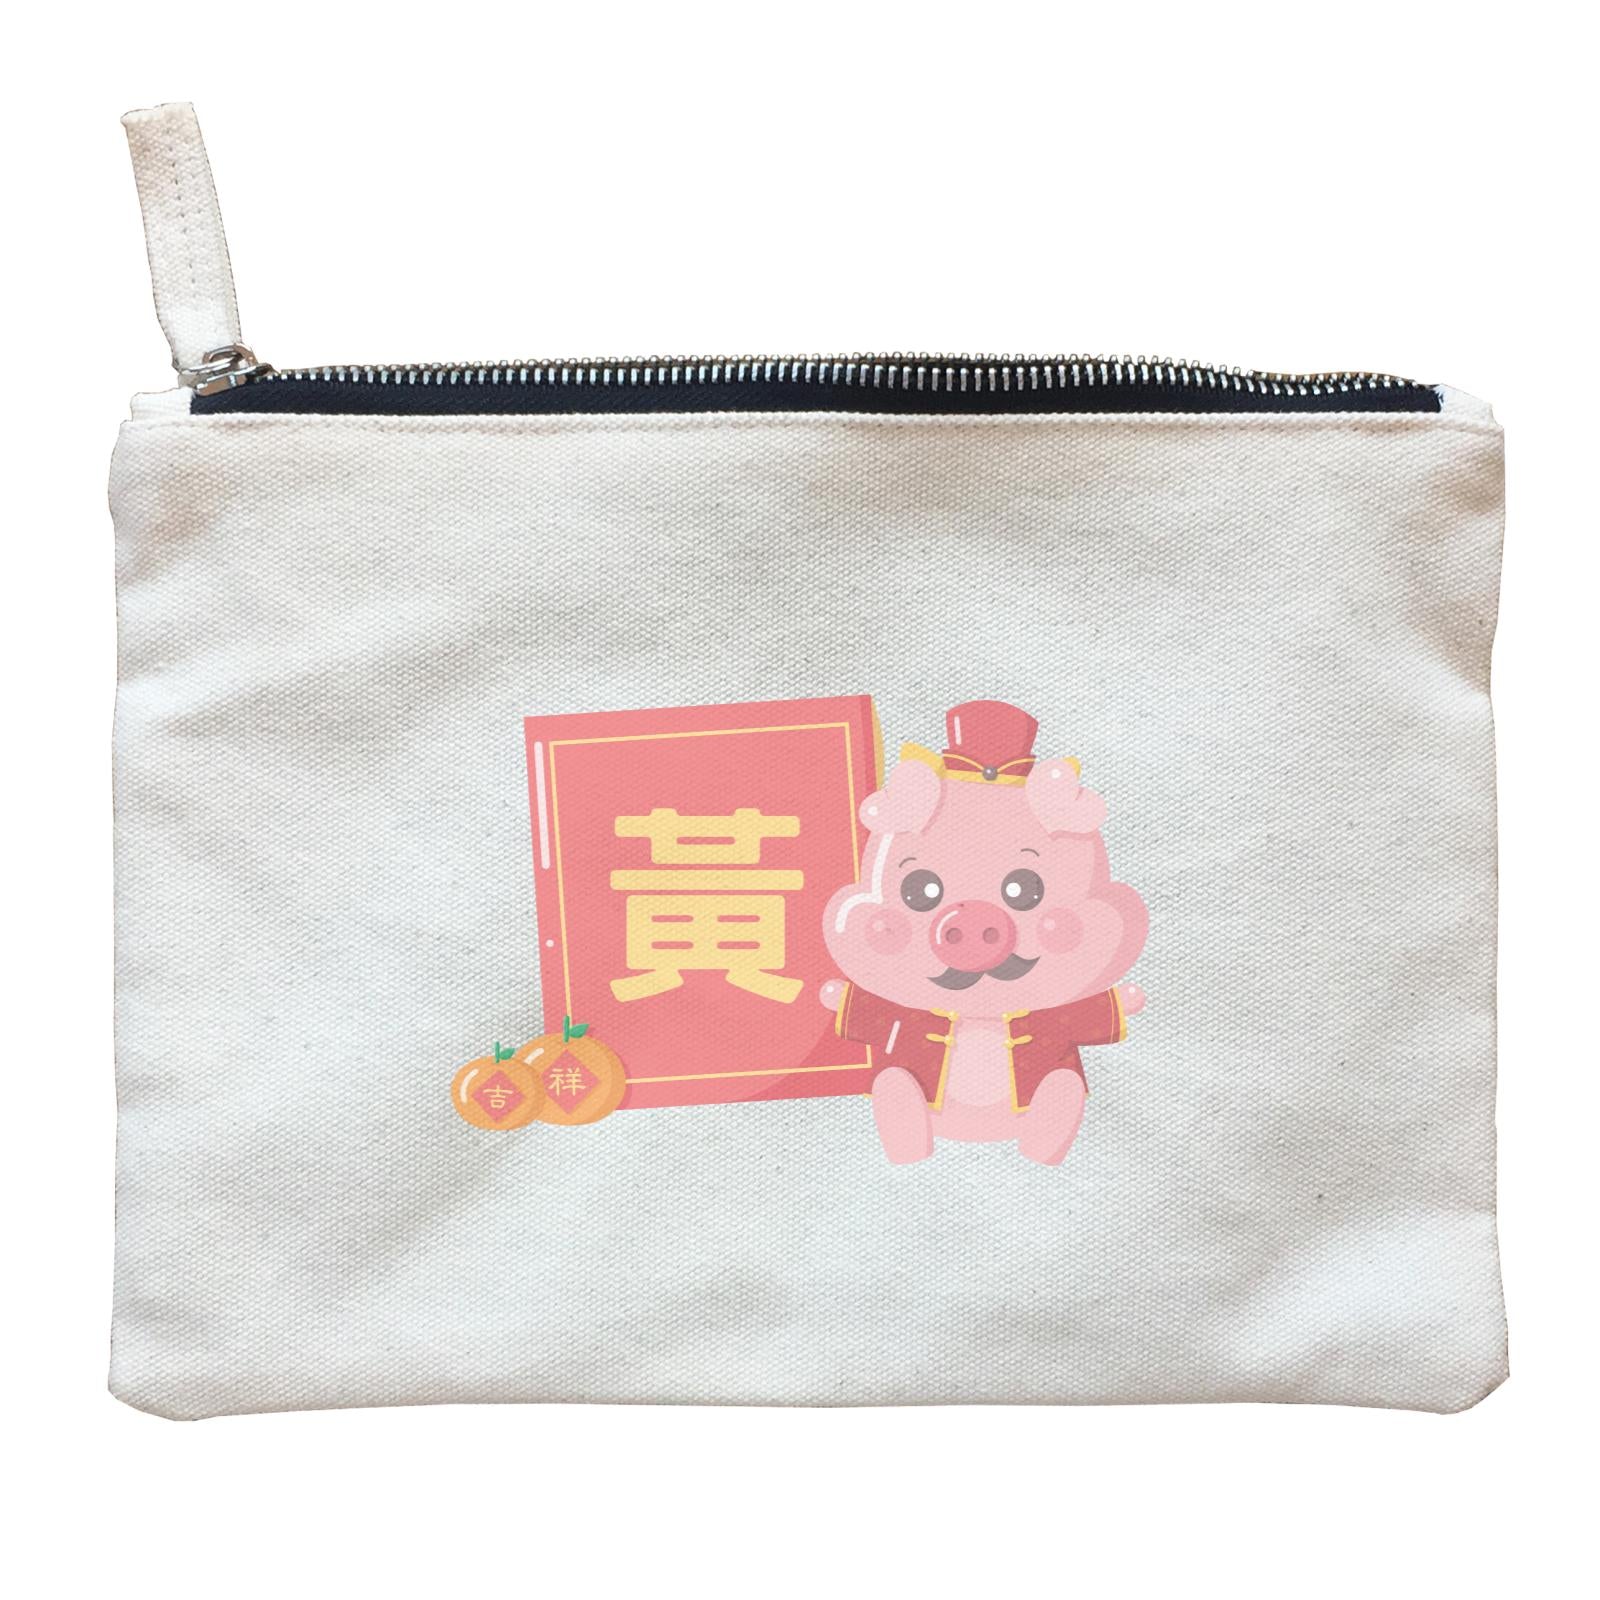 Chinese New Year Cute Pig Angpau Dad Accessories With Addname Zipper Pouch